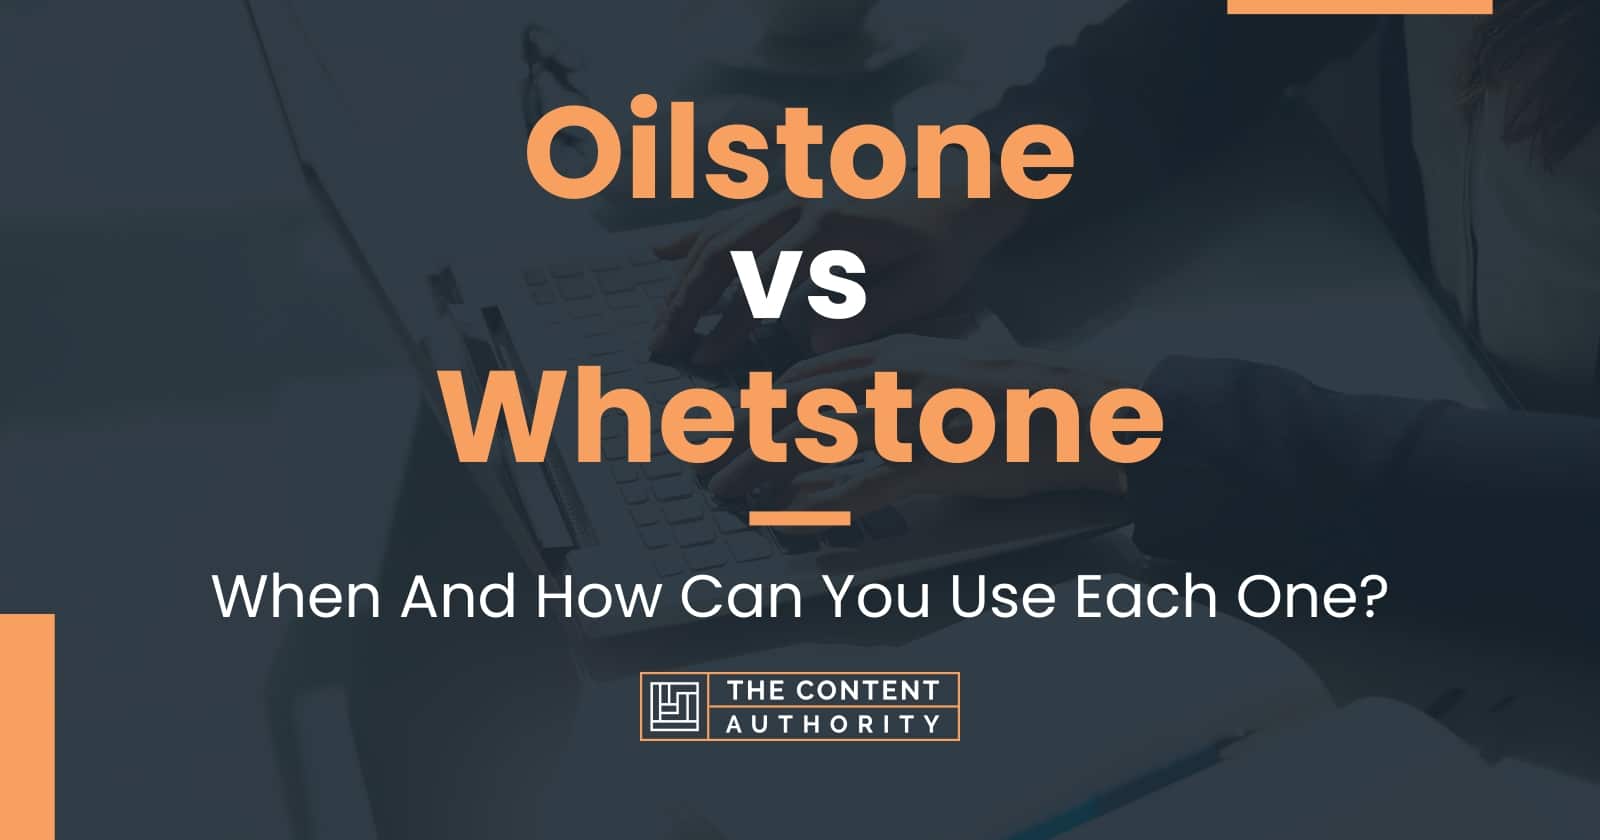 Oilstone vs Whetstone When And How Can You Use Each One?